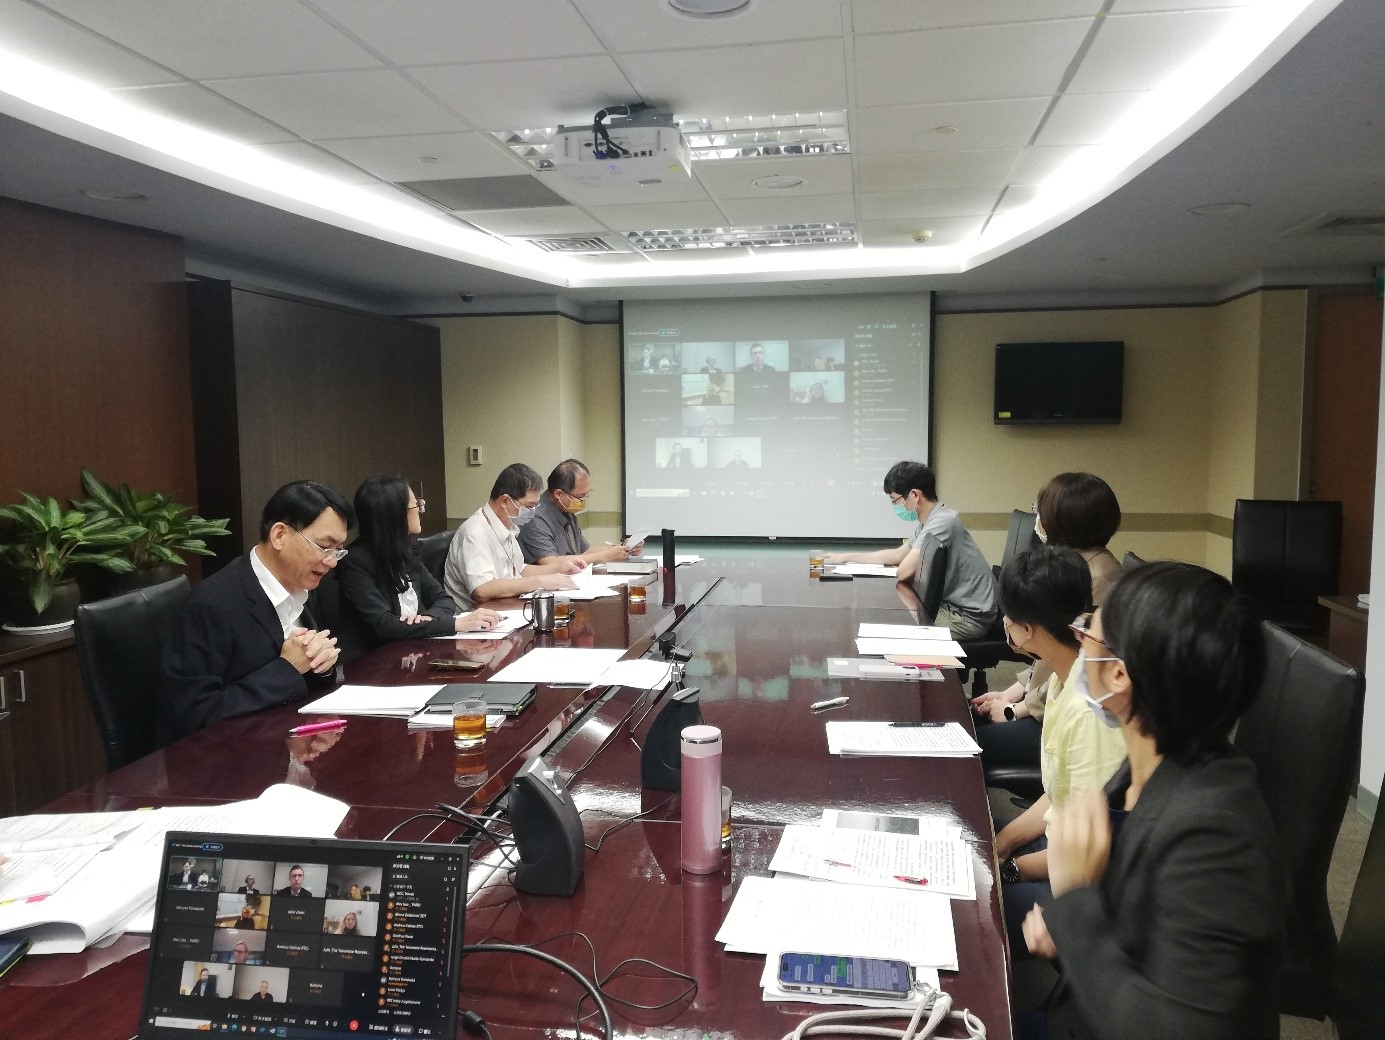 Photo 2: NCC Director General of Dept. of Planning Dr. Jiun-Yu Wen with NCC colleagues attend the video conference.